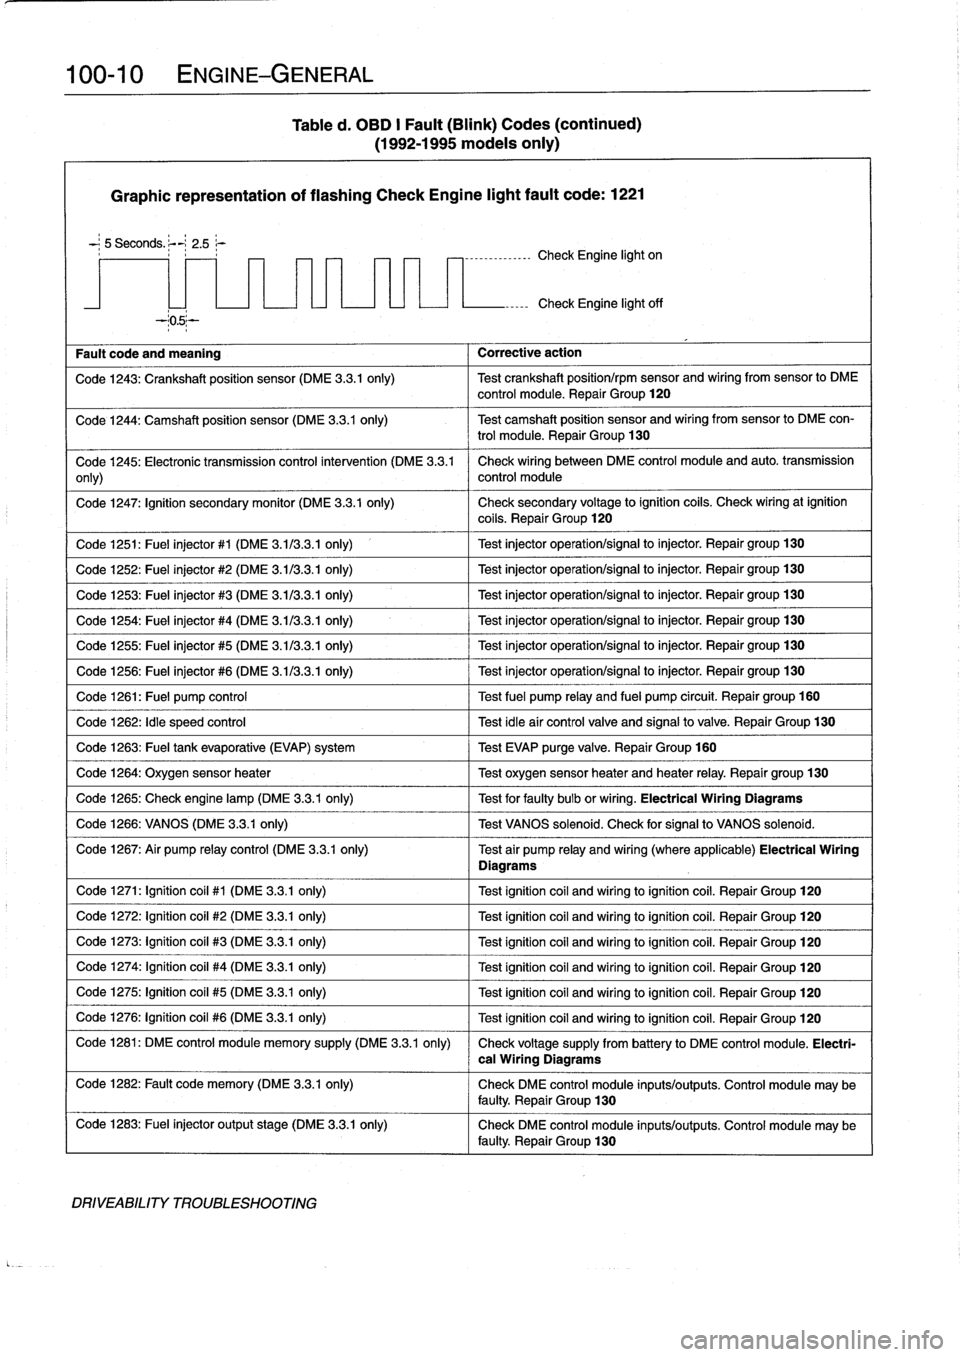 BMW M3 1996 E36 Workshop Manual 
100-
1
0
ENGINE-GENERAL

Table
d
.
OBD
I
Fault
(Blink)
Codes
(continued)

(1992-1995
modeis
only)

Graphic
representation
of
flashing
Check
Engine
light
fault
code
:
1221
-
;
5
Seconds
.
;--~
2
.5
r
